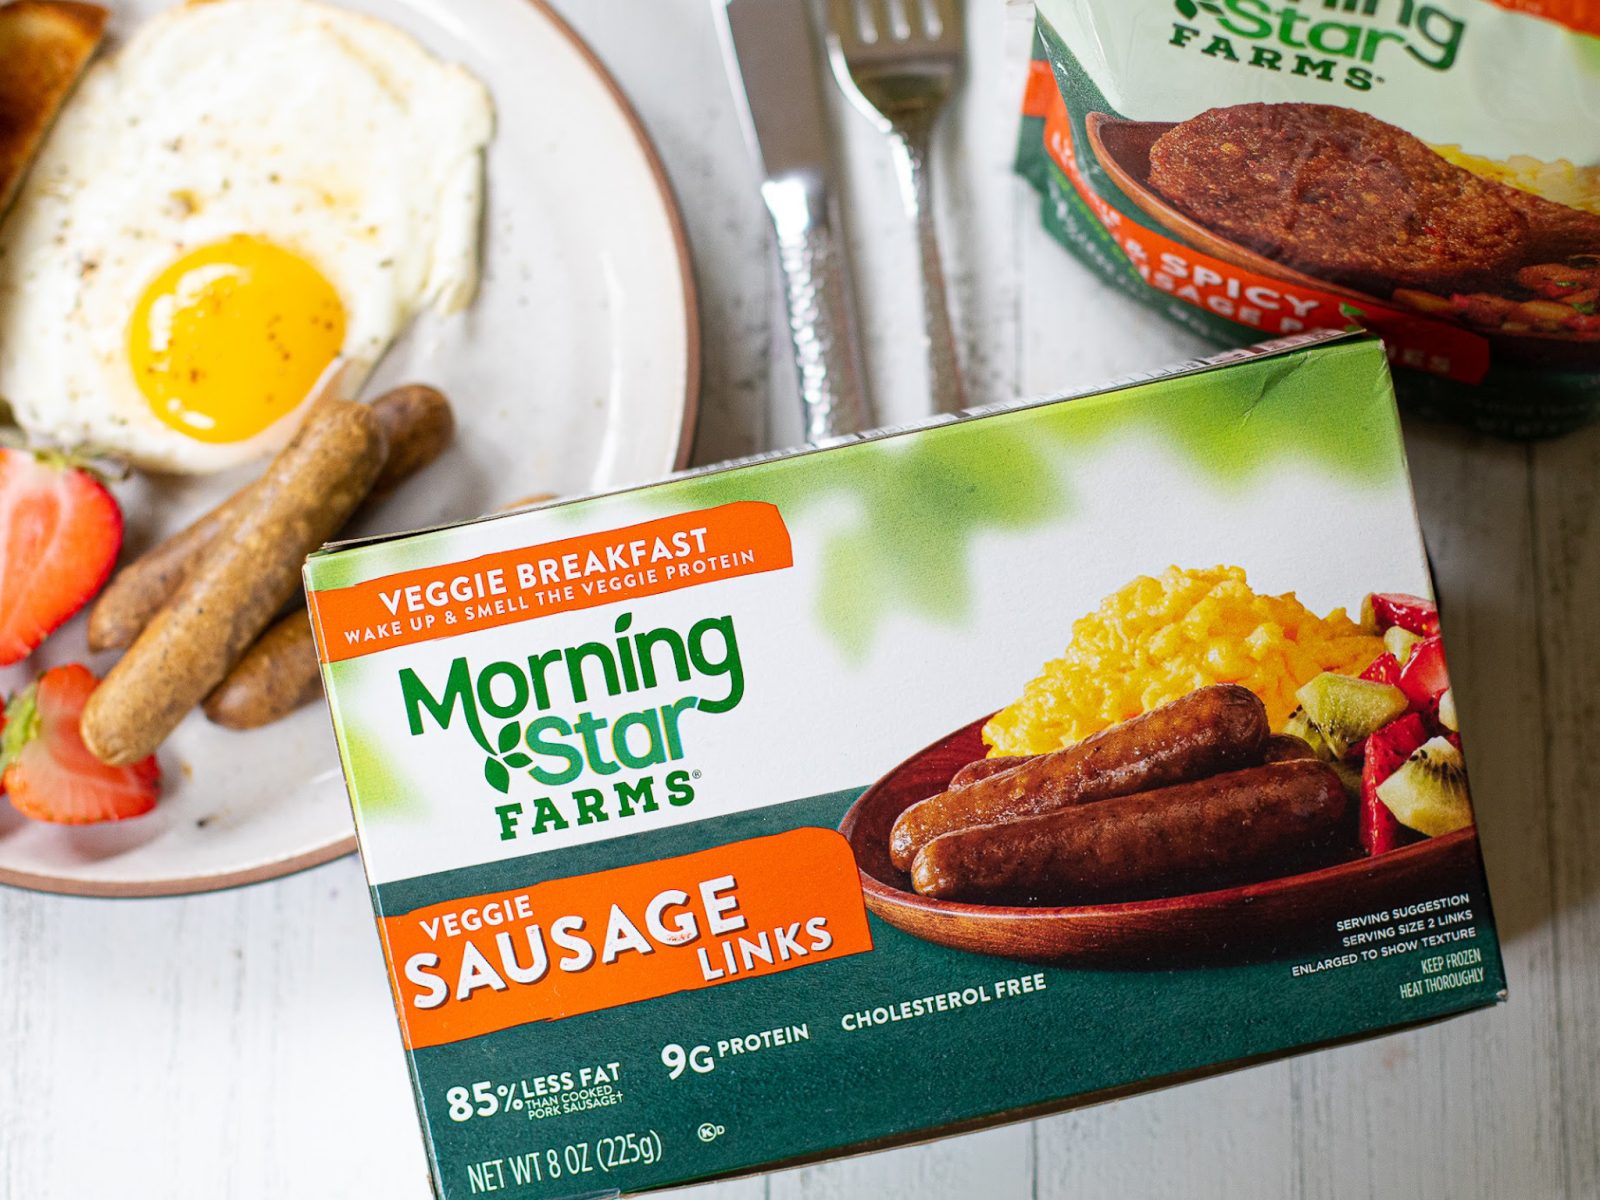 Get MorningStar Farms Veggie Entrees As Low As FREE At Publix